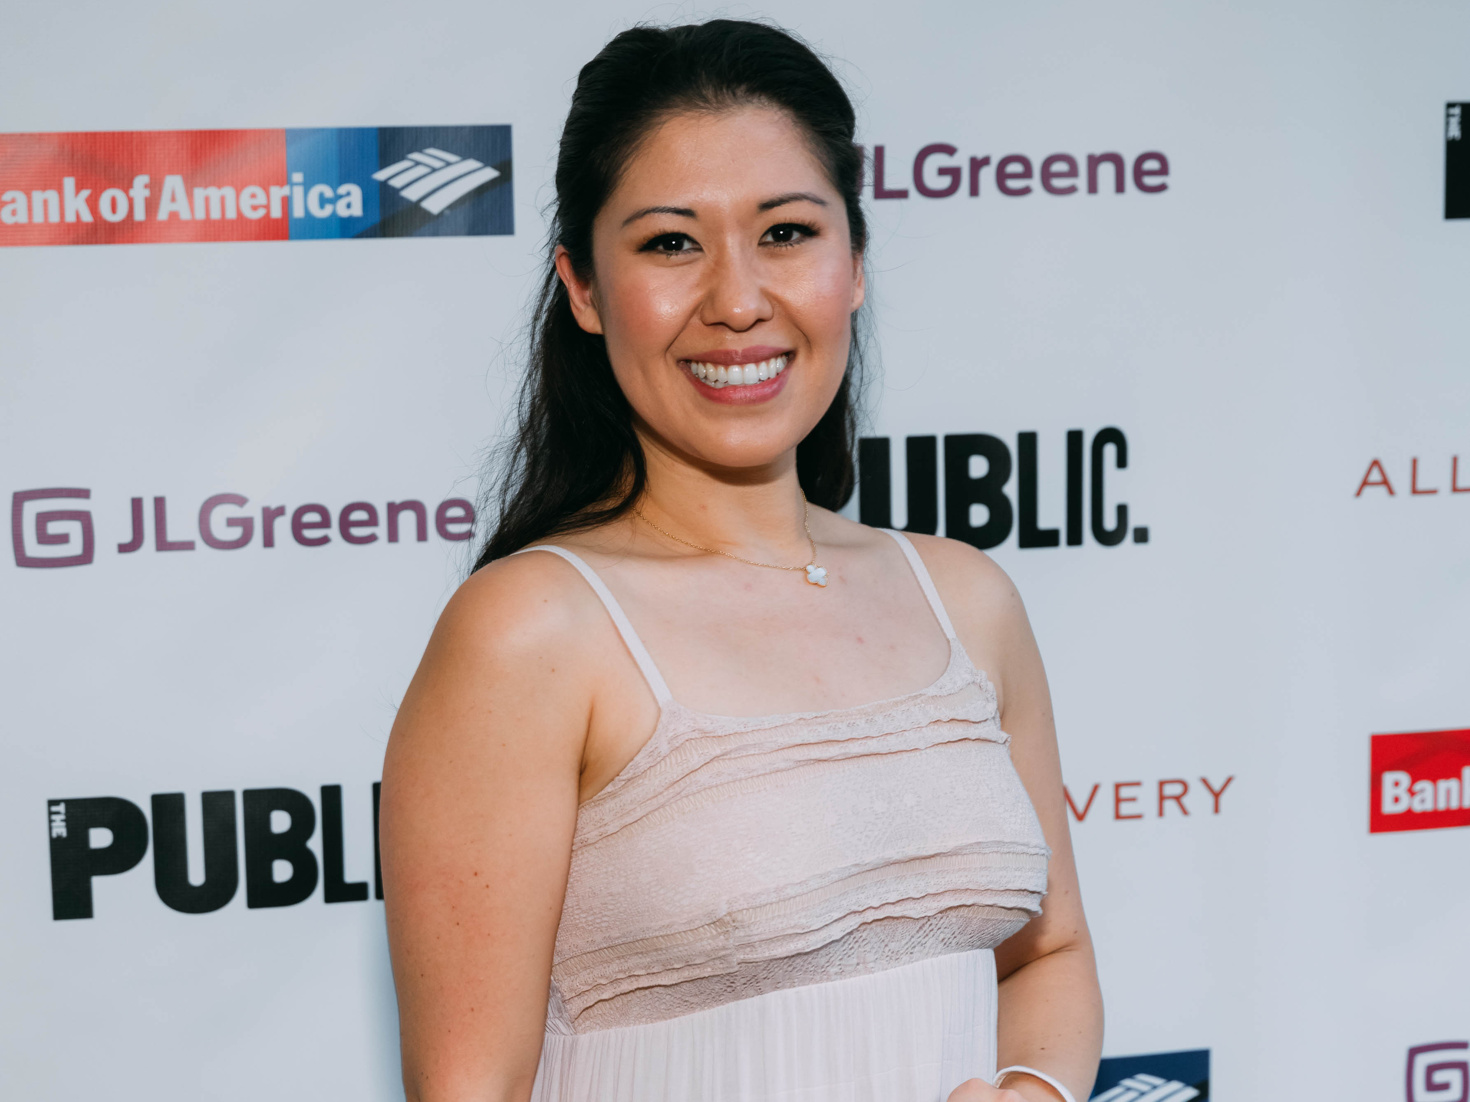 Tony winner Ruthie Ann Miles was critically injured after being struck by a...